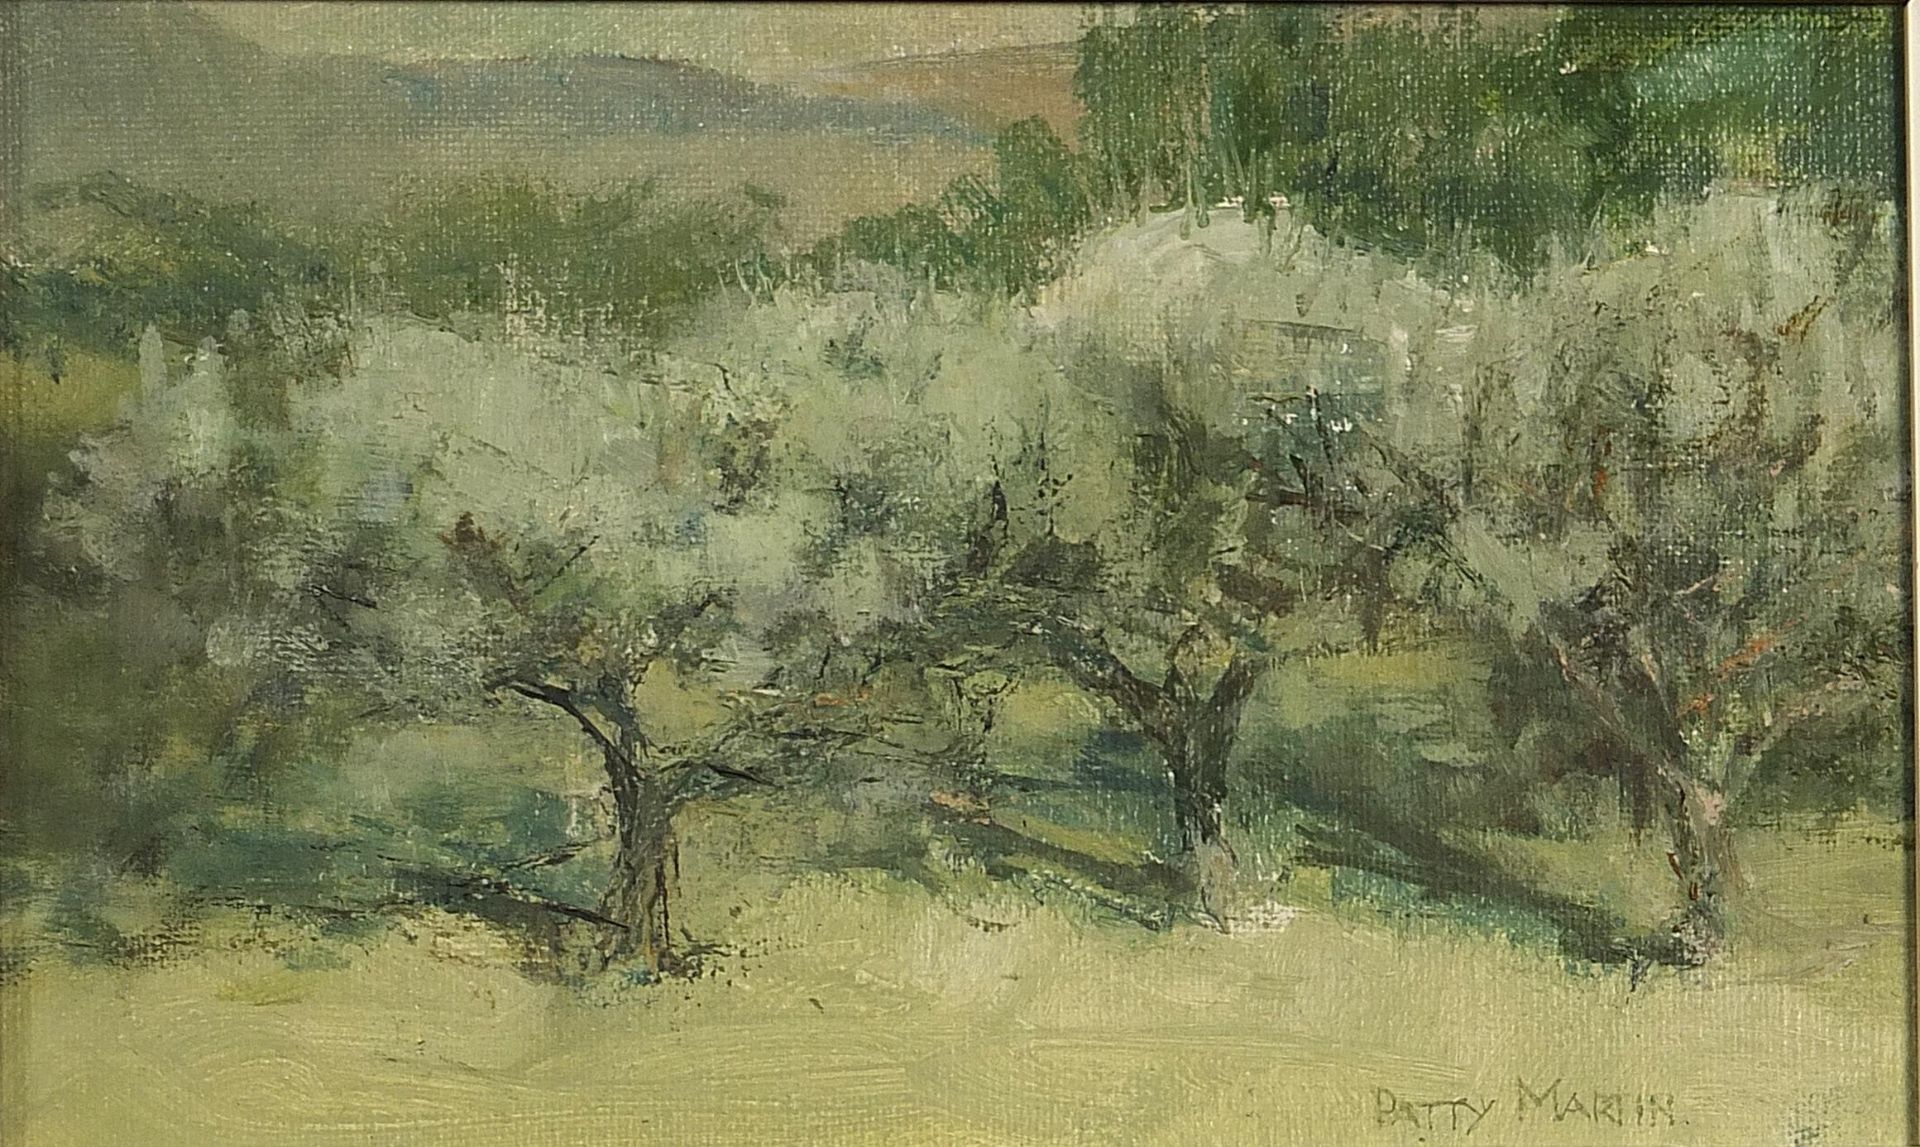 Patty Martin - Apple trees, oil on canvas board, details verso, mounted and framed, 28cm x 17cm